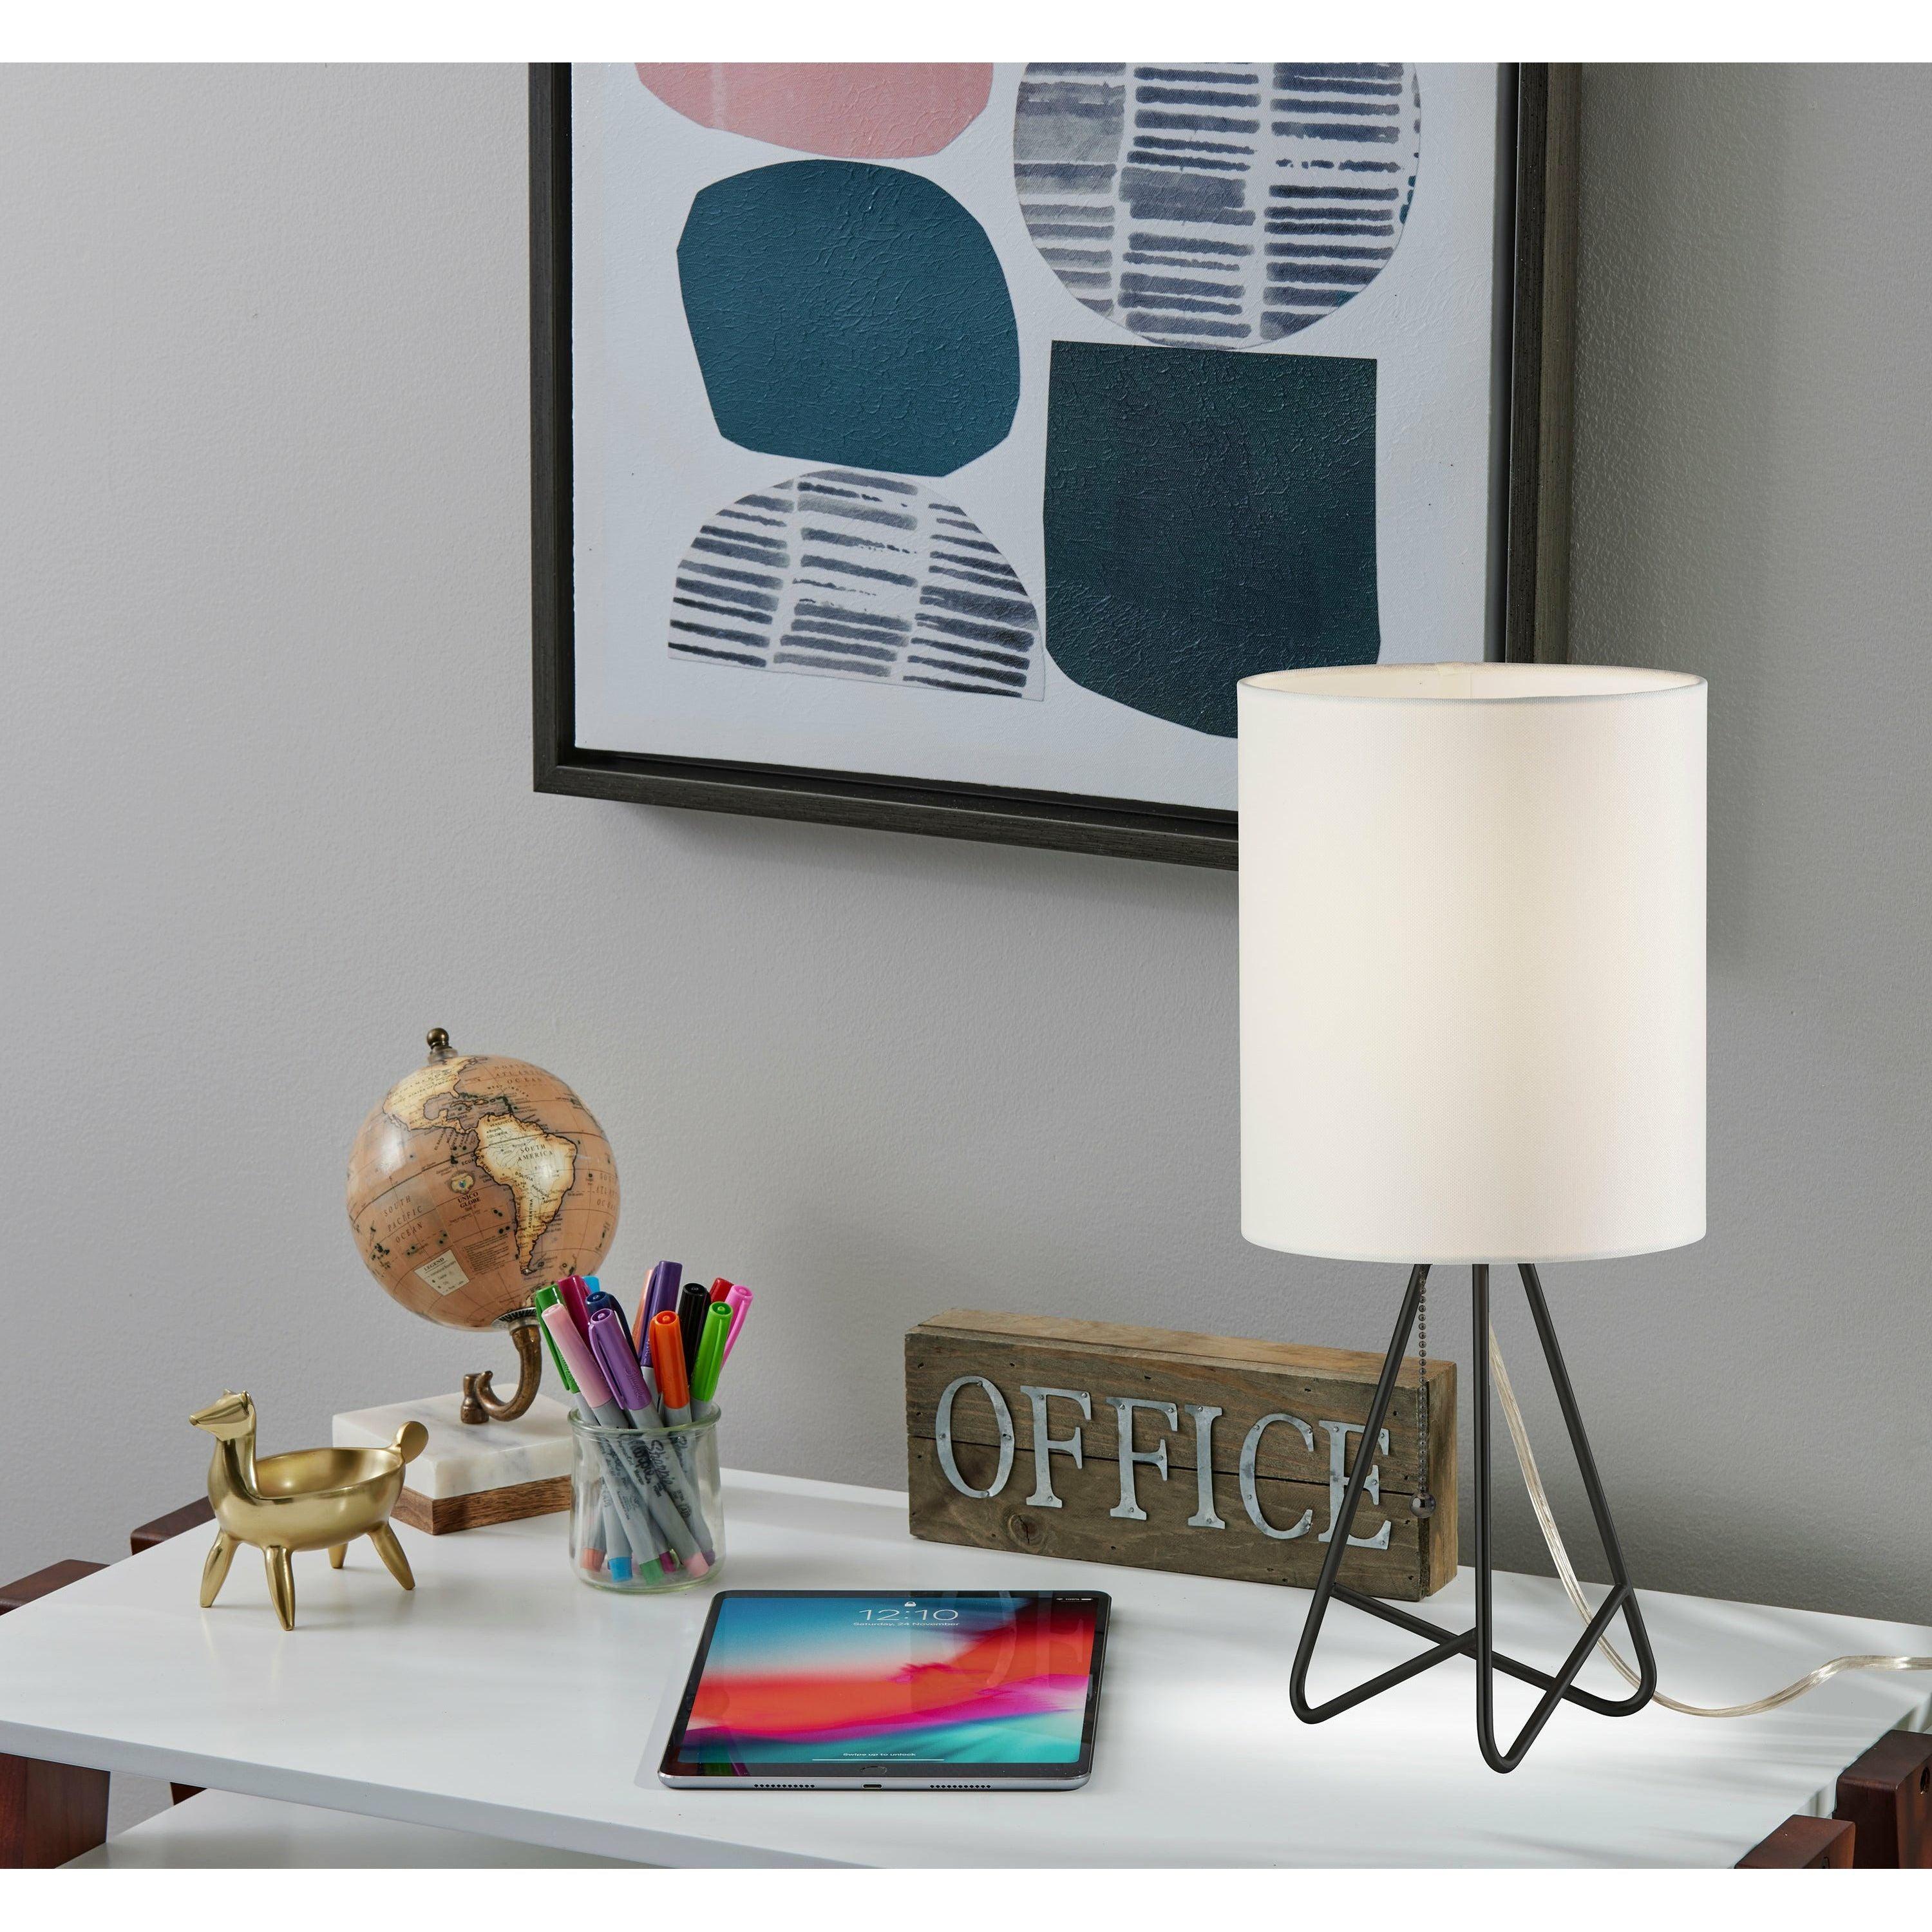 Adesso - Nell Table Lamp - Lights Canada